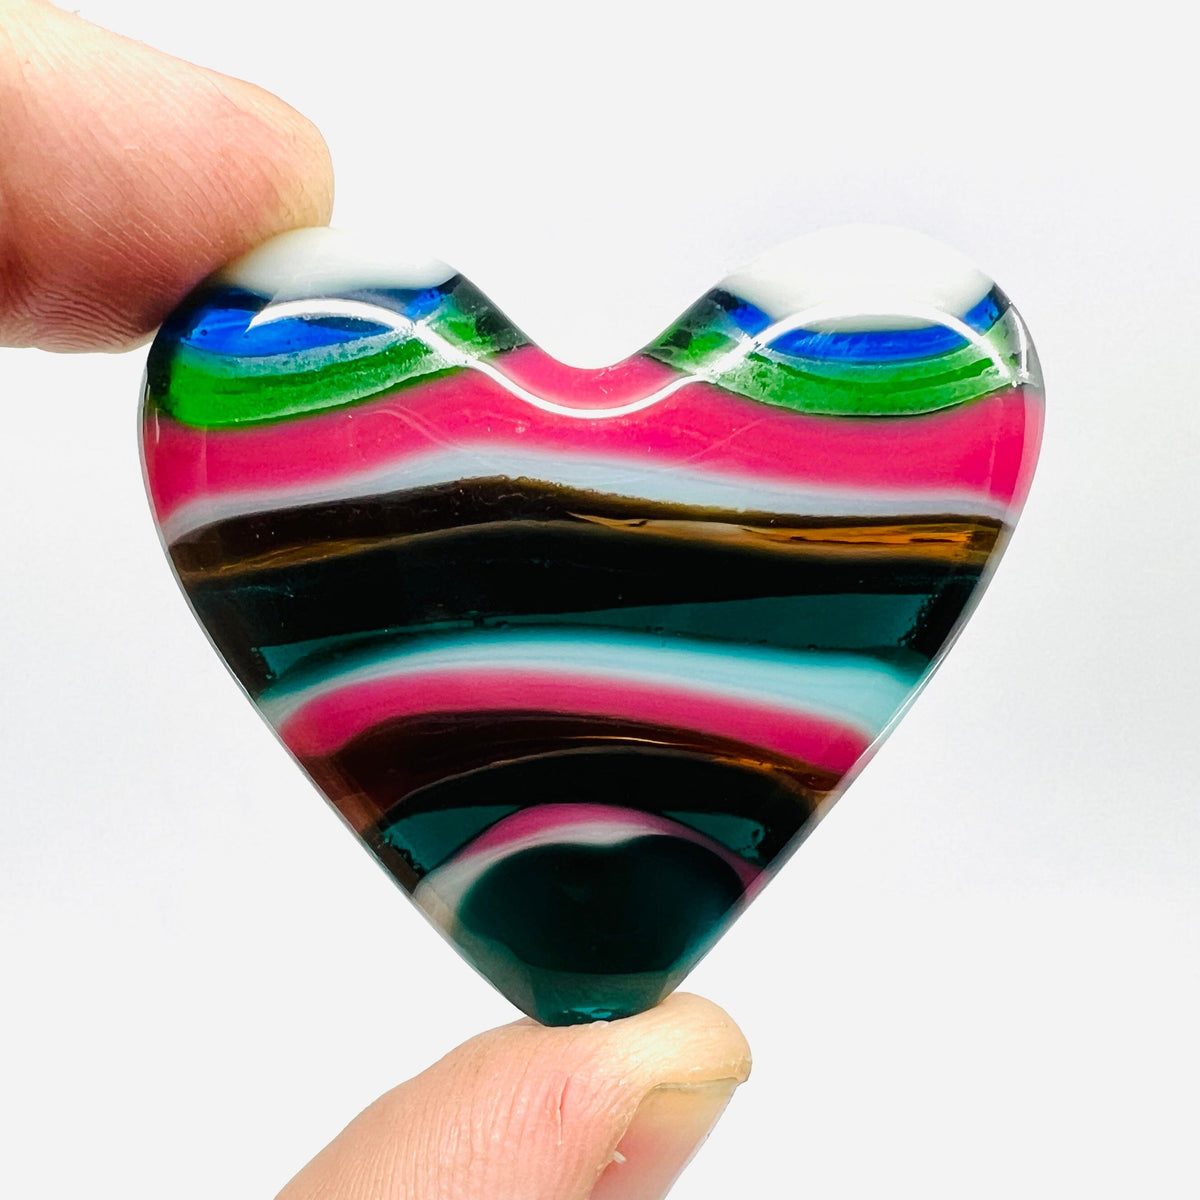 Fused Pocket Heart 175 Miniature Glimmer Glass Gifts 